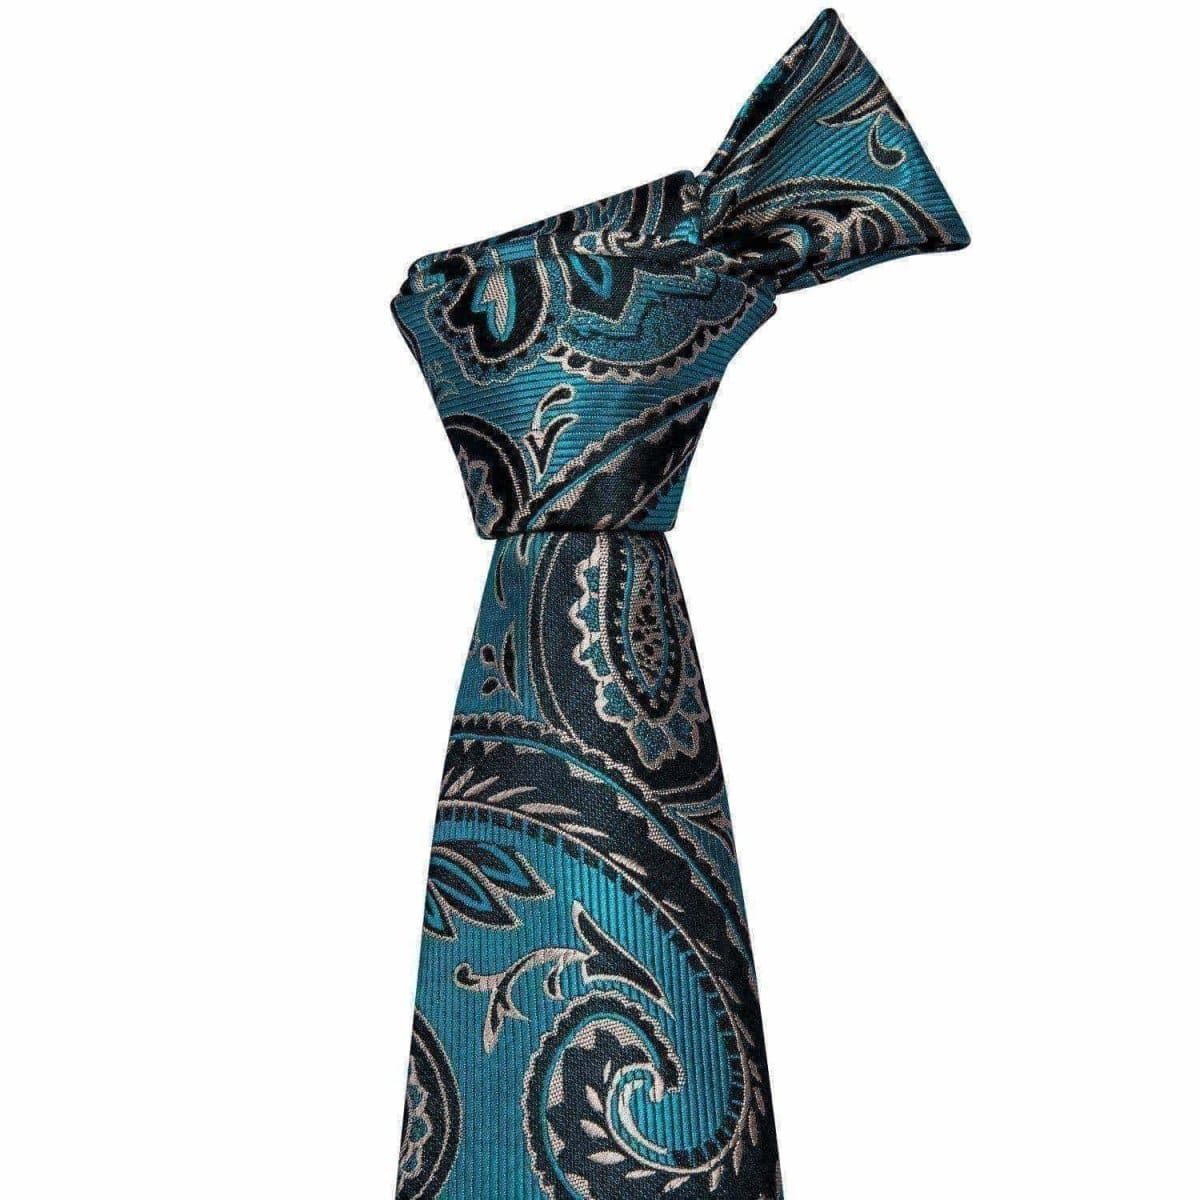 Teal, Silver & Black Paisley Matching Tie Set (3pc) - Modern Mister